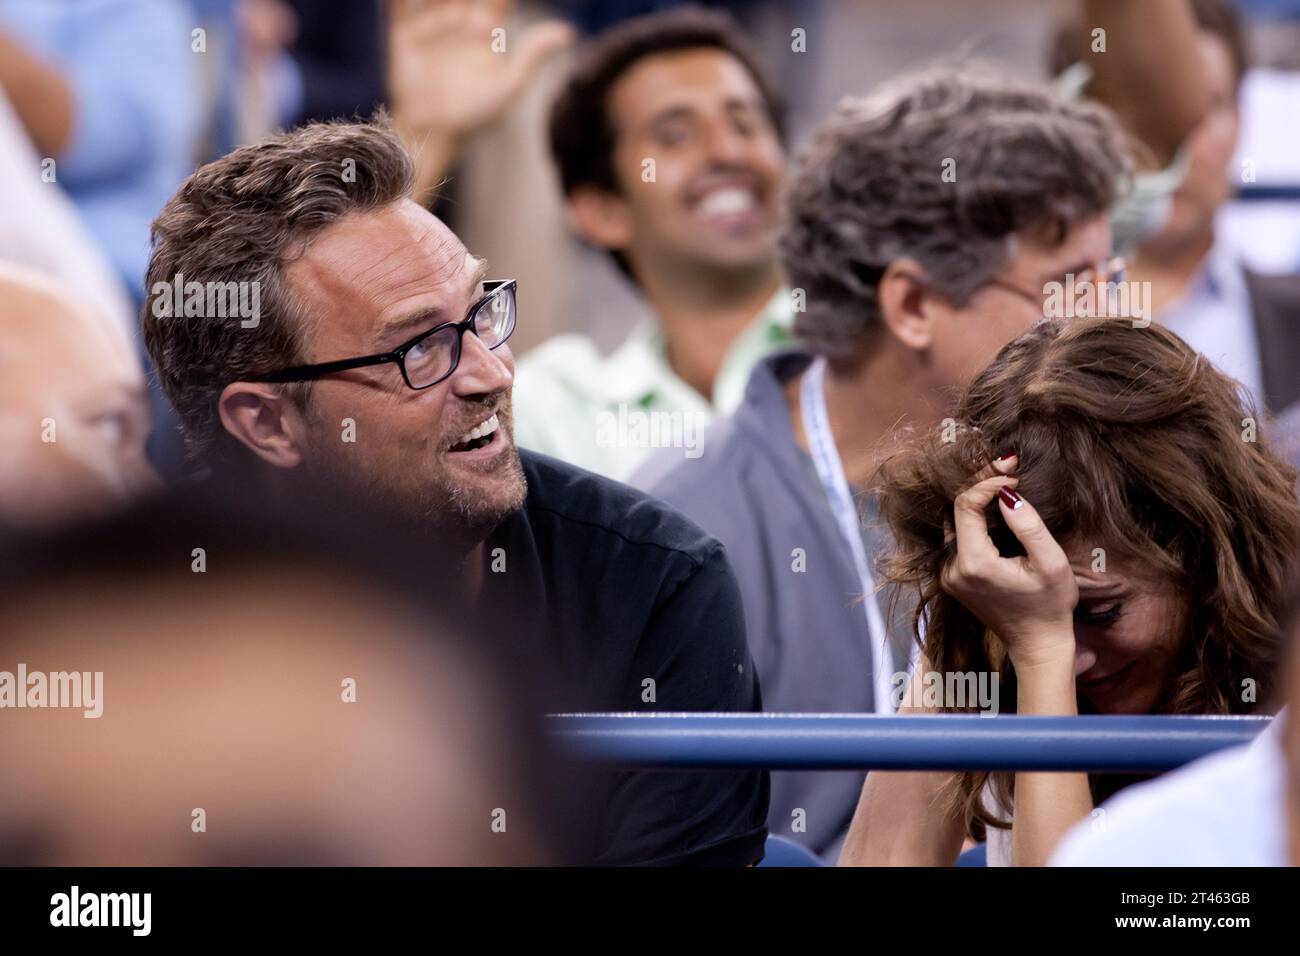 NEW YORK, NY - SEPTEMBER 08:  Matthew Perry attends Day 11 of the 2011 U.S. Open Tennis Championships at the USTA Billie Jean King National Tennis Center in Flushing, Queens, New York, USA.on September 8, 2011 in the Flushing neighborhood of the Queens borough of New York City   People:  Matthew Perry Stock Photo